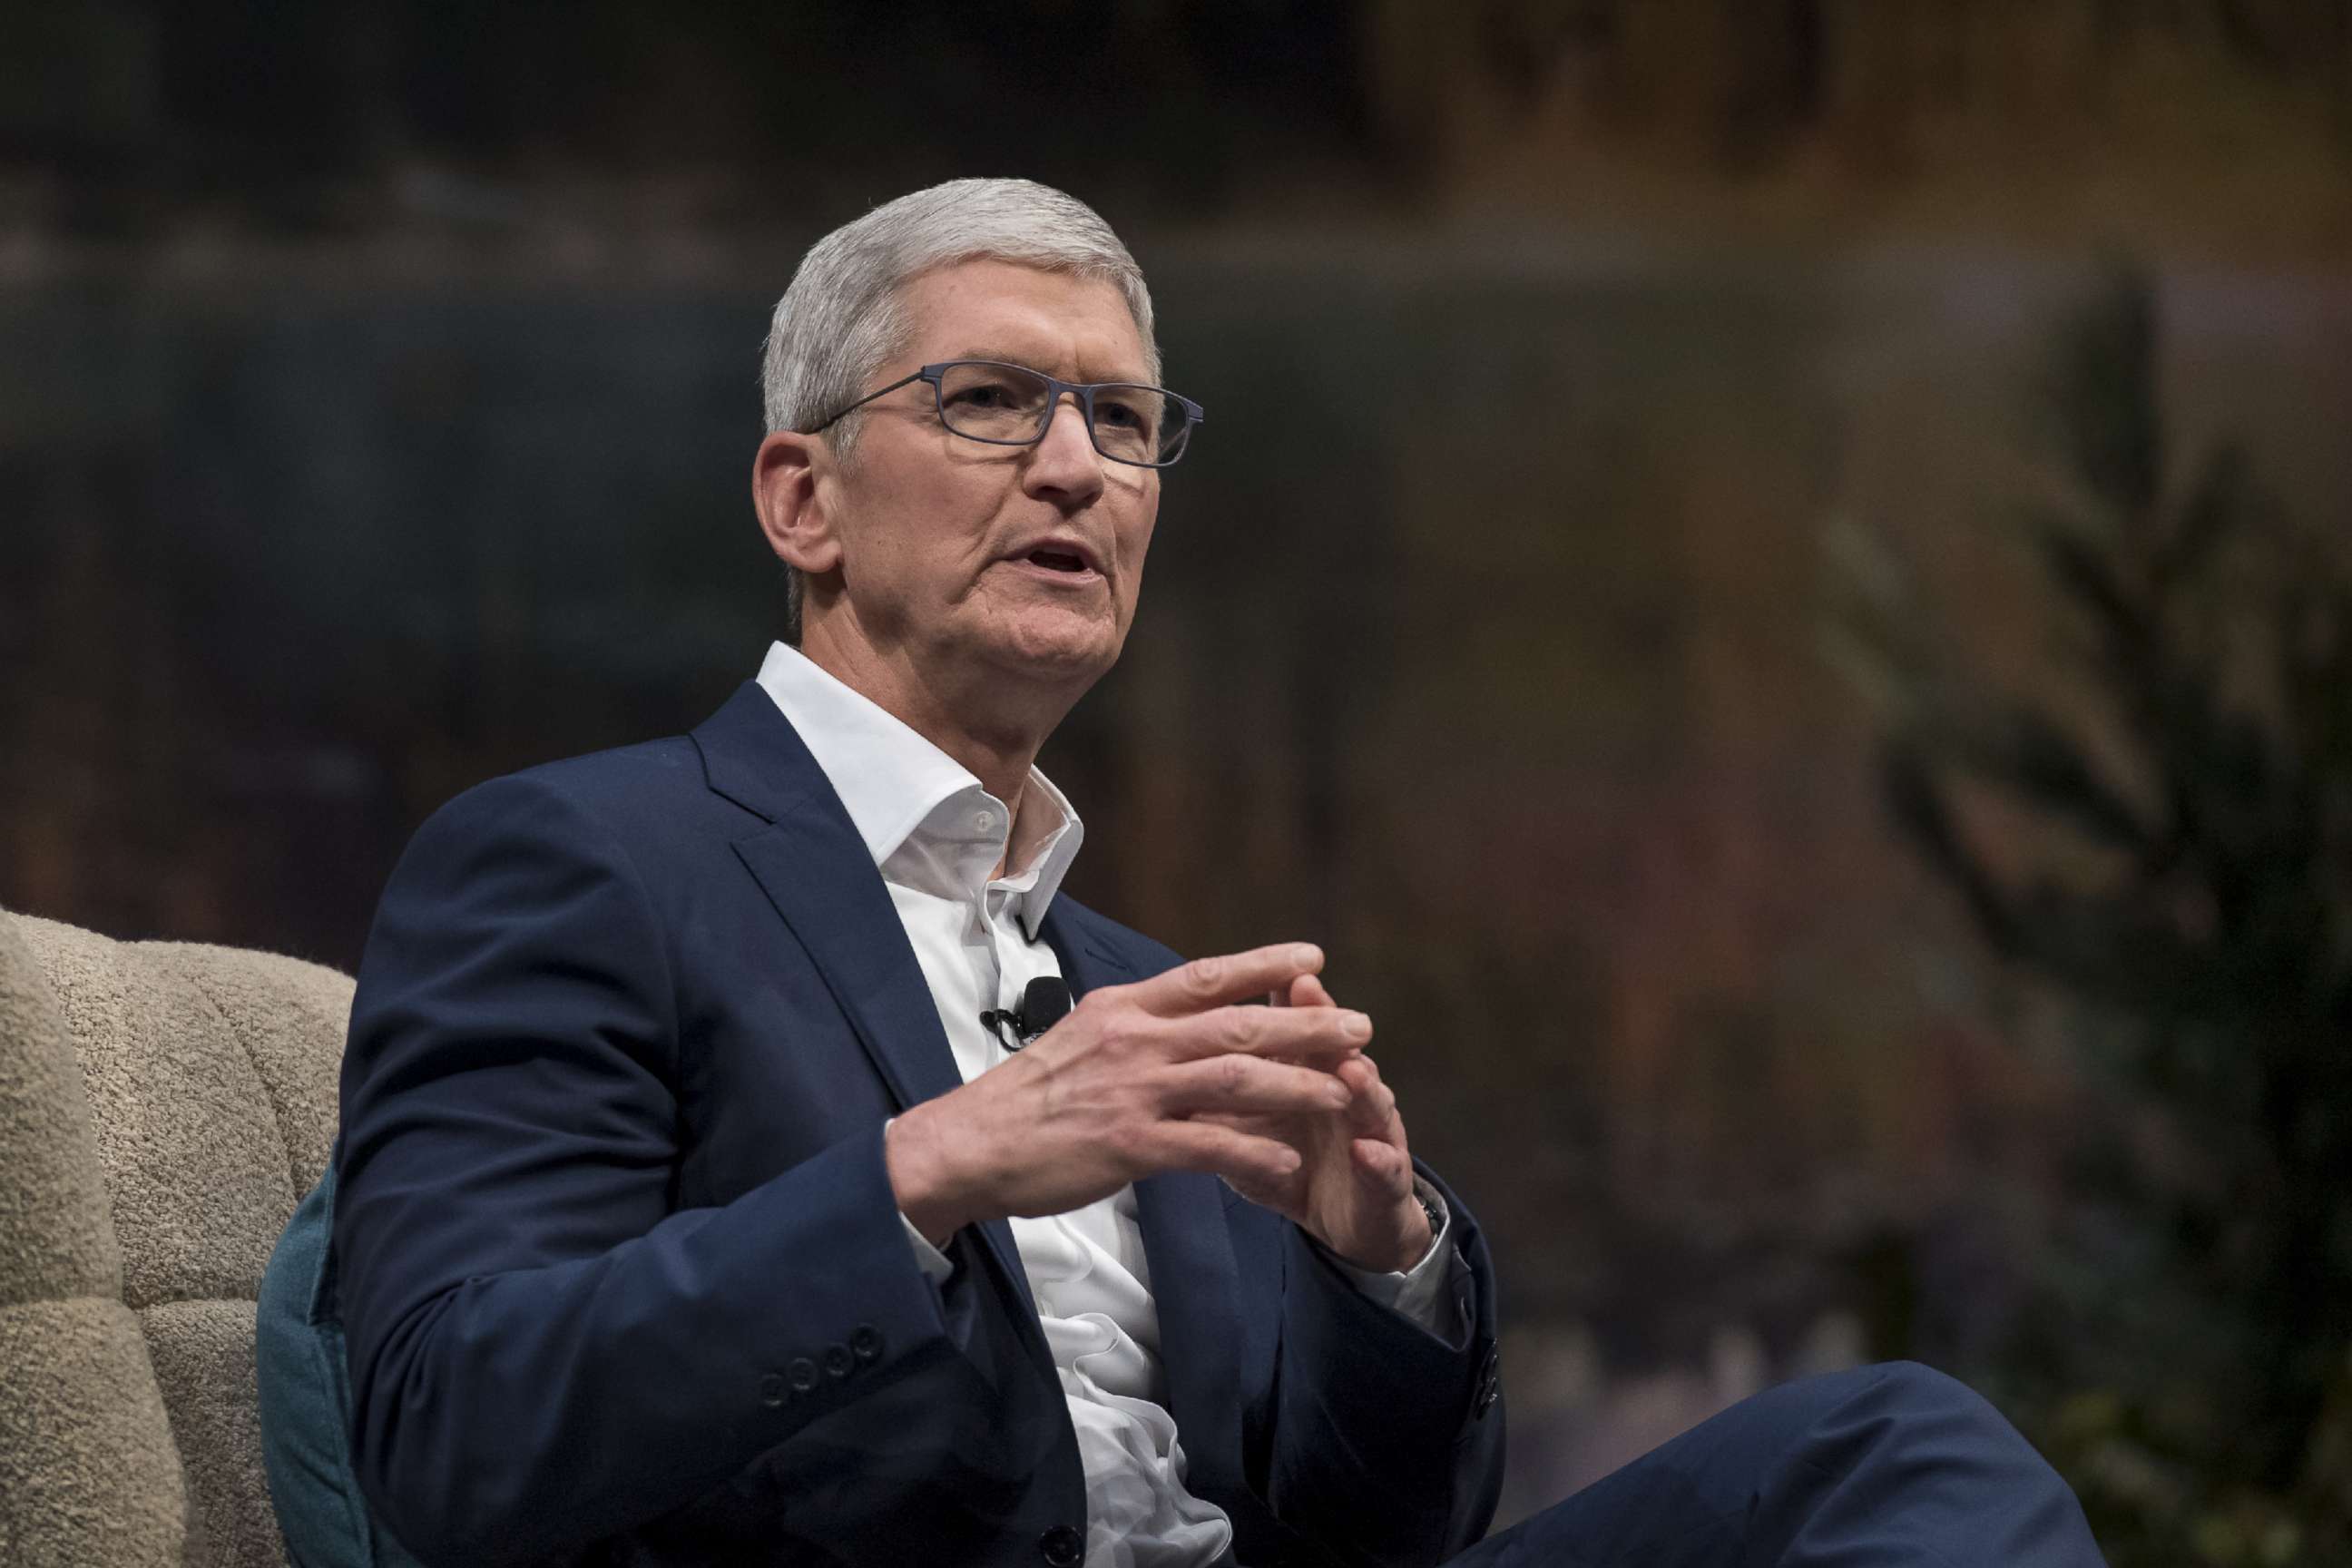 PHOTO: Tim Cook, chief executive officer of Apple Inc., speaks during a keynote at the 2019 DreamForce conference in San Francisco, Nov. 19, 2019.